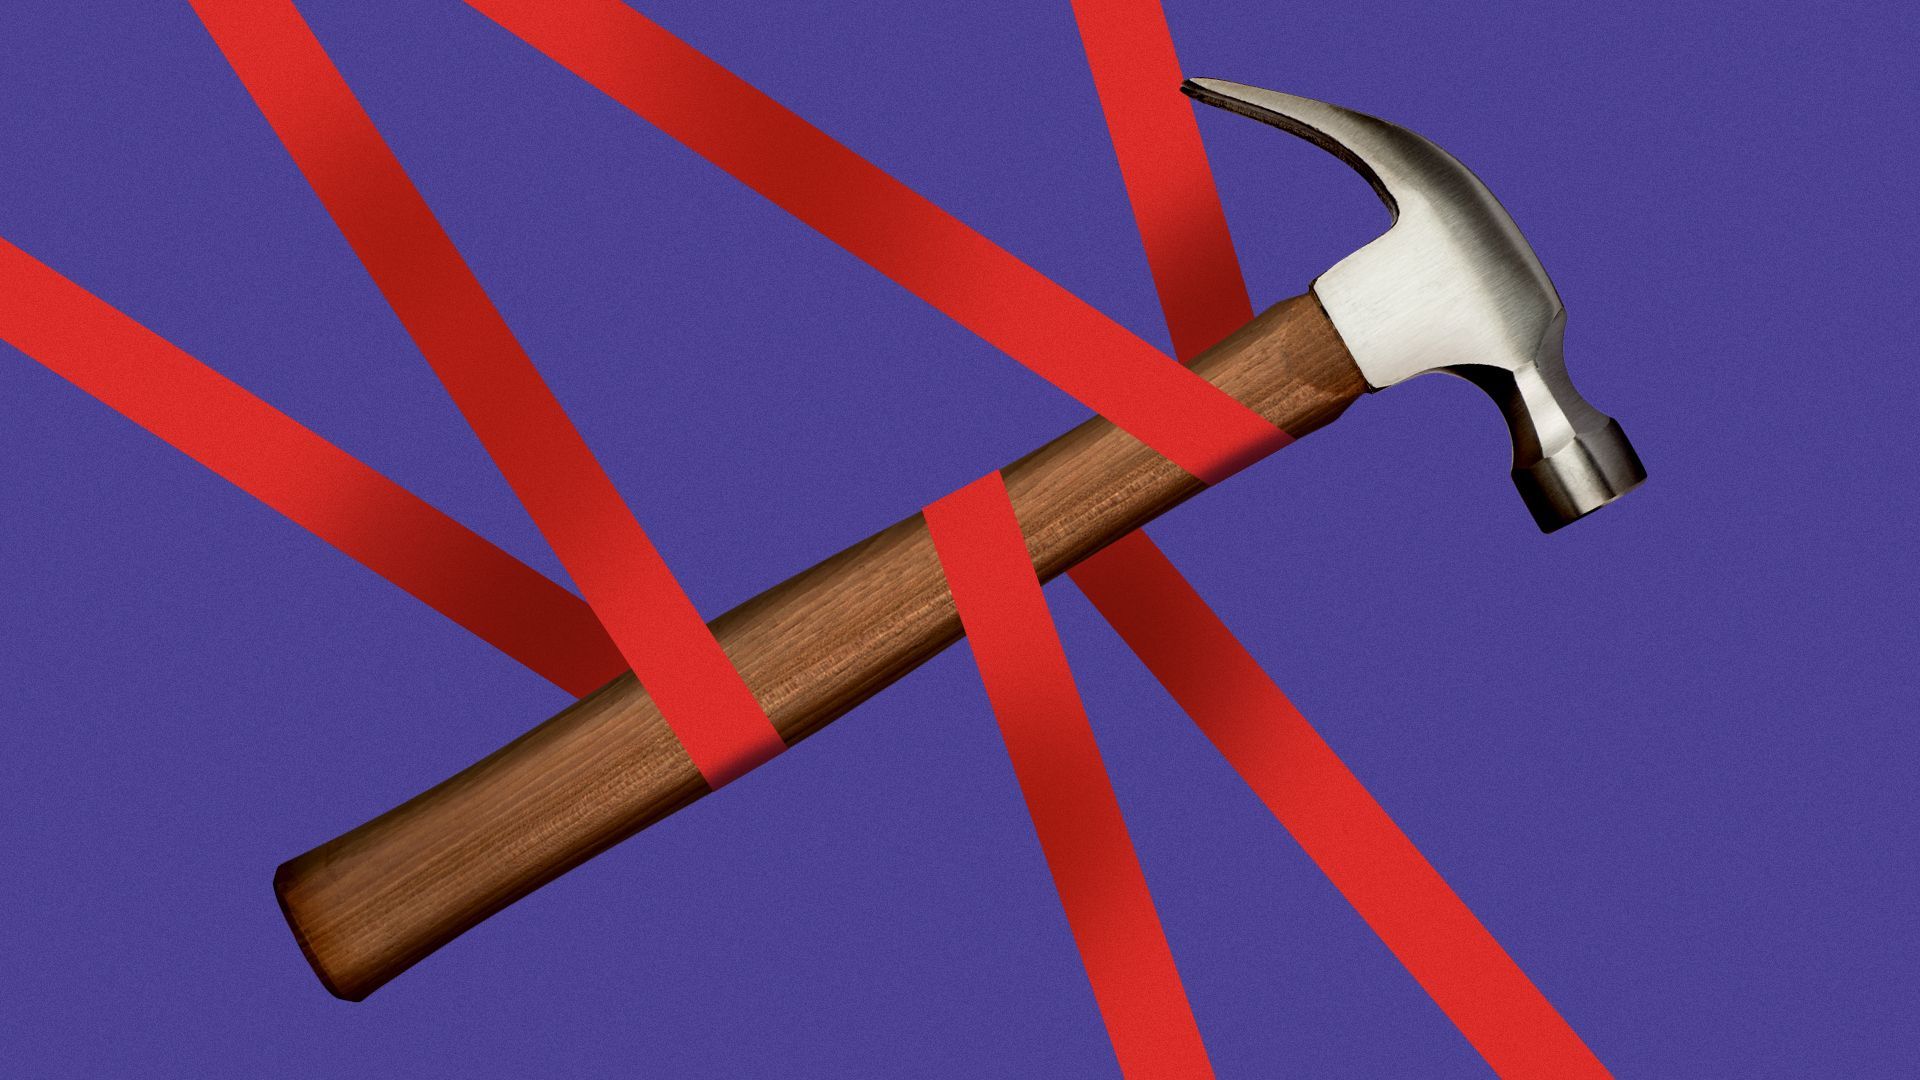 Illustration of a hammer wrapped in red tape.